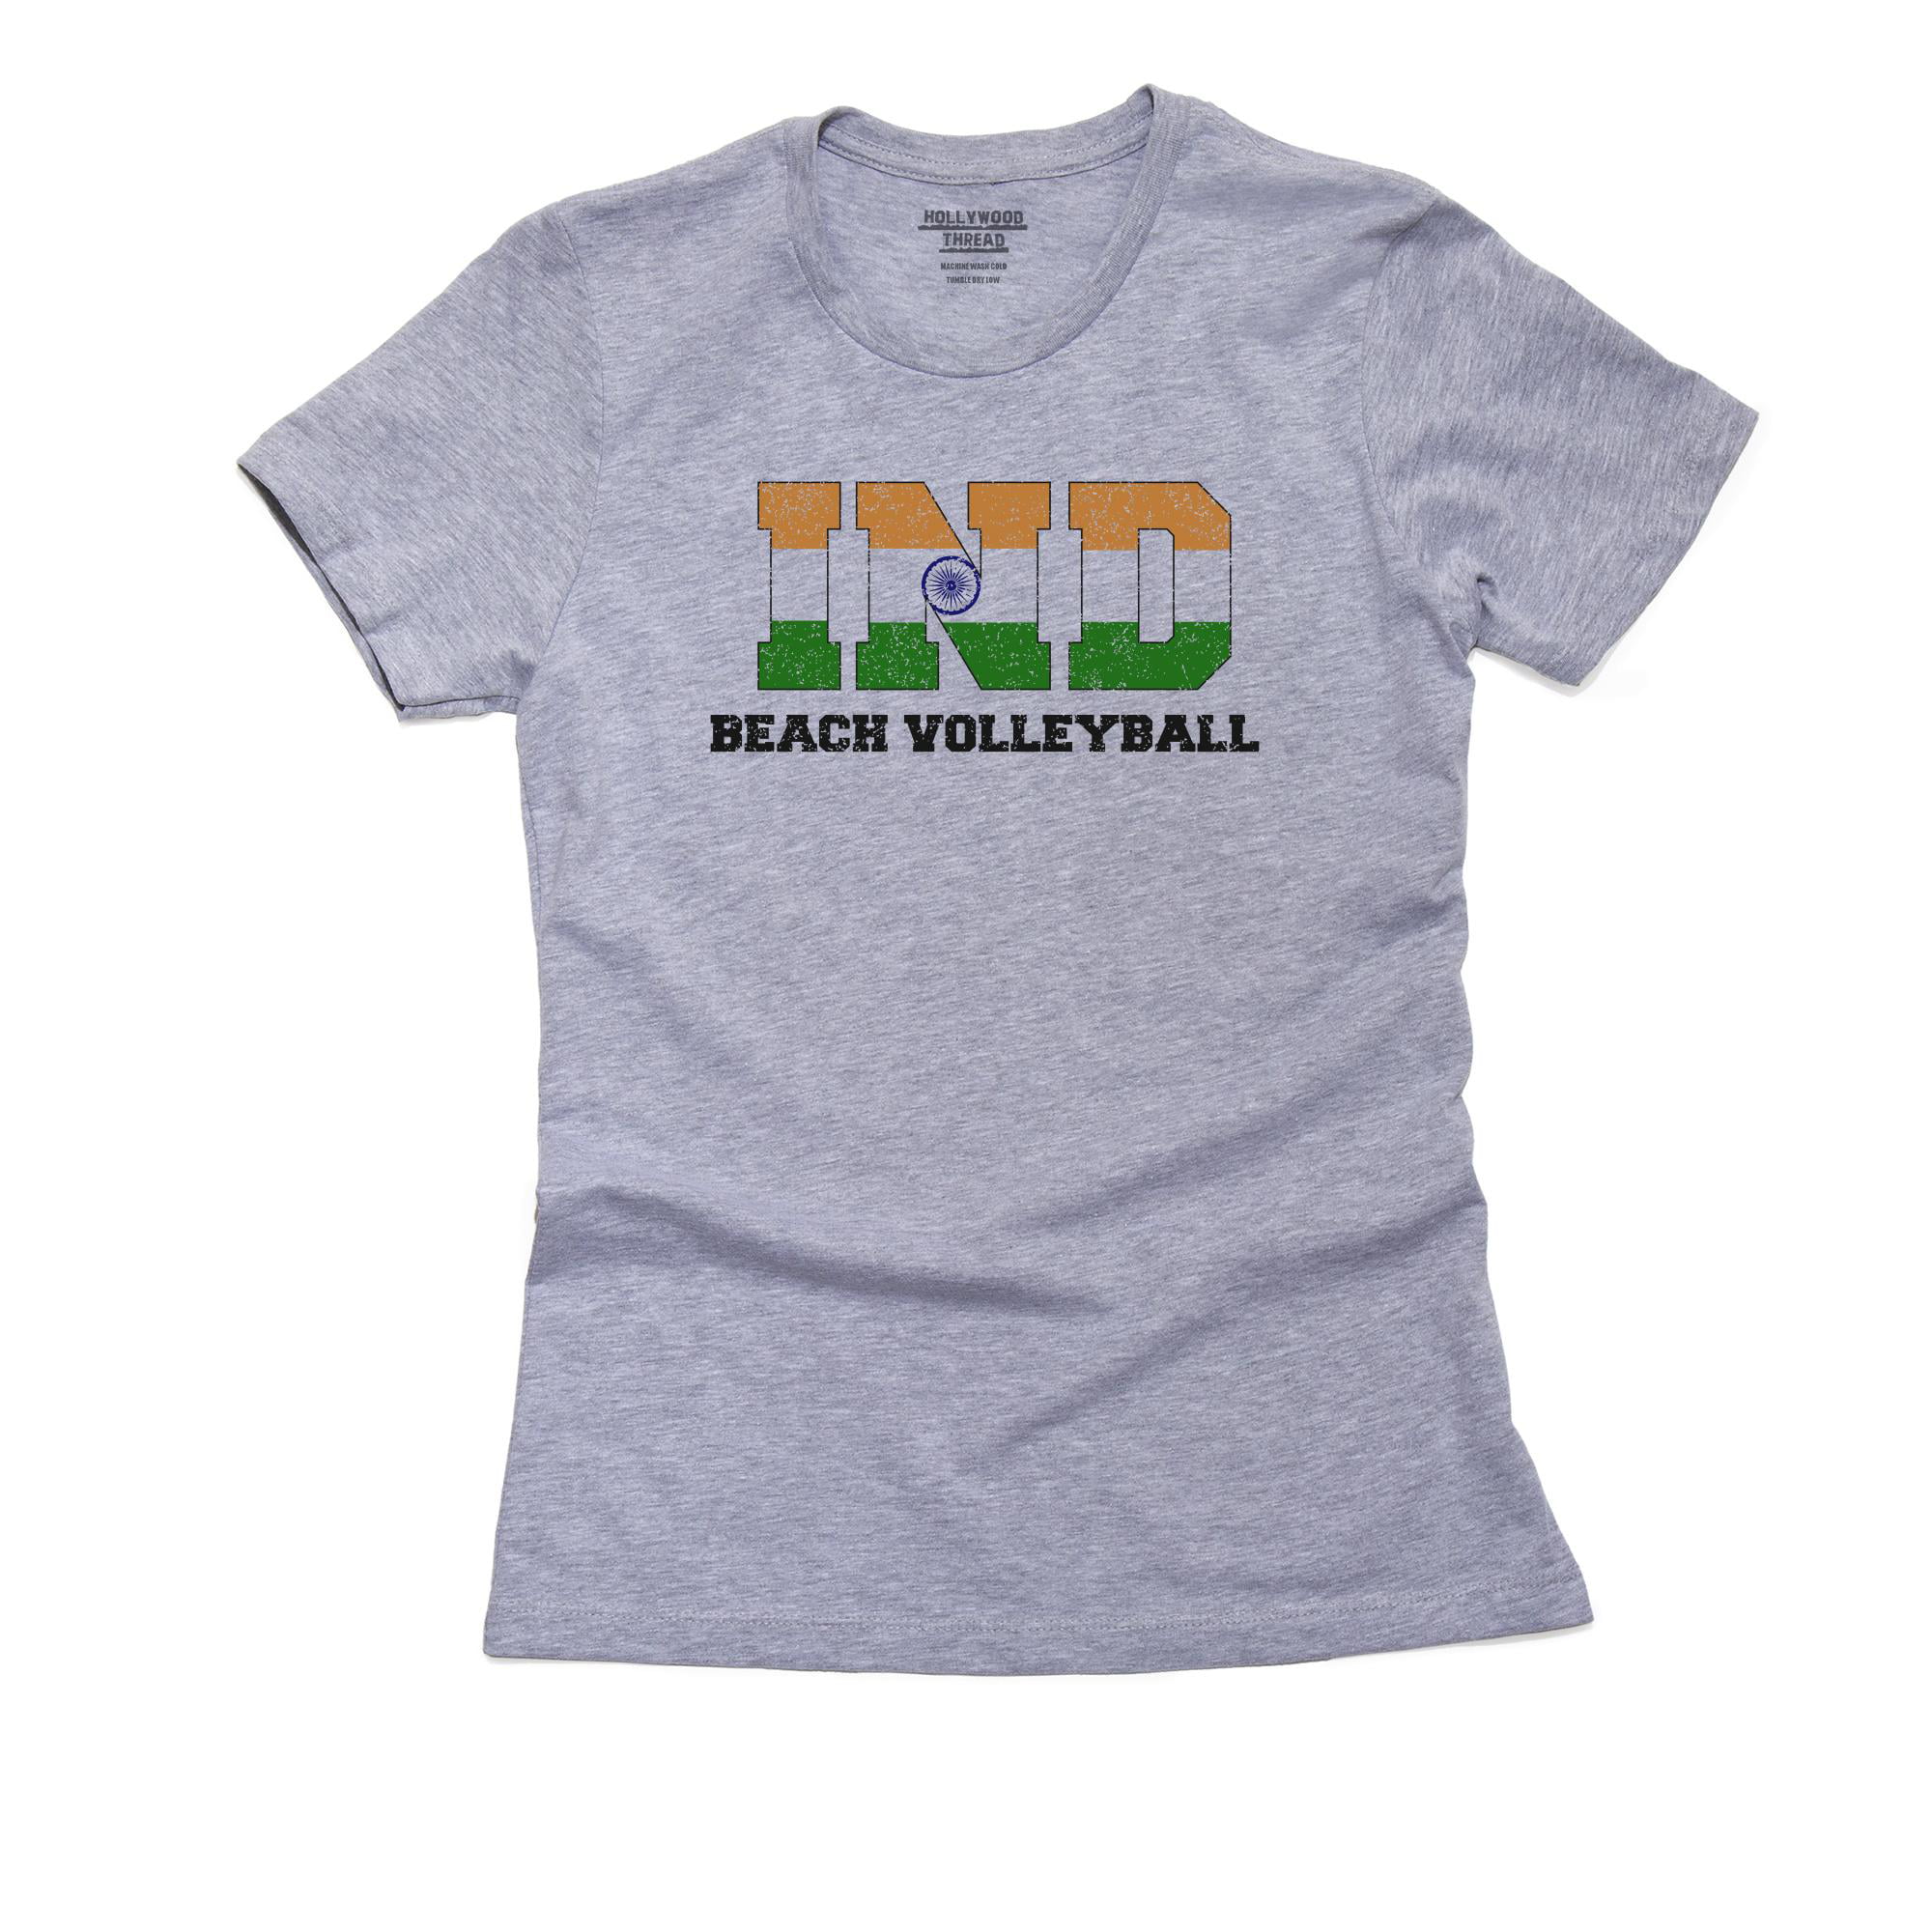 volleyball t shirt india